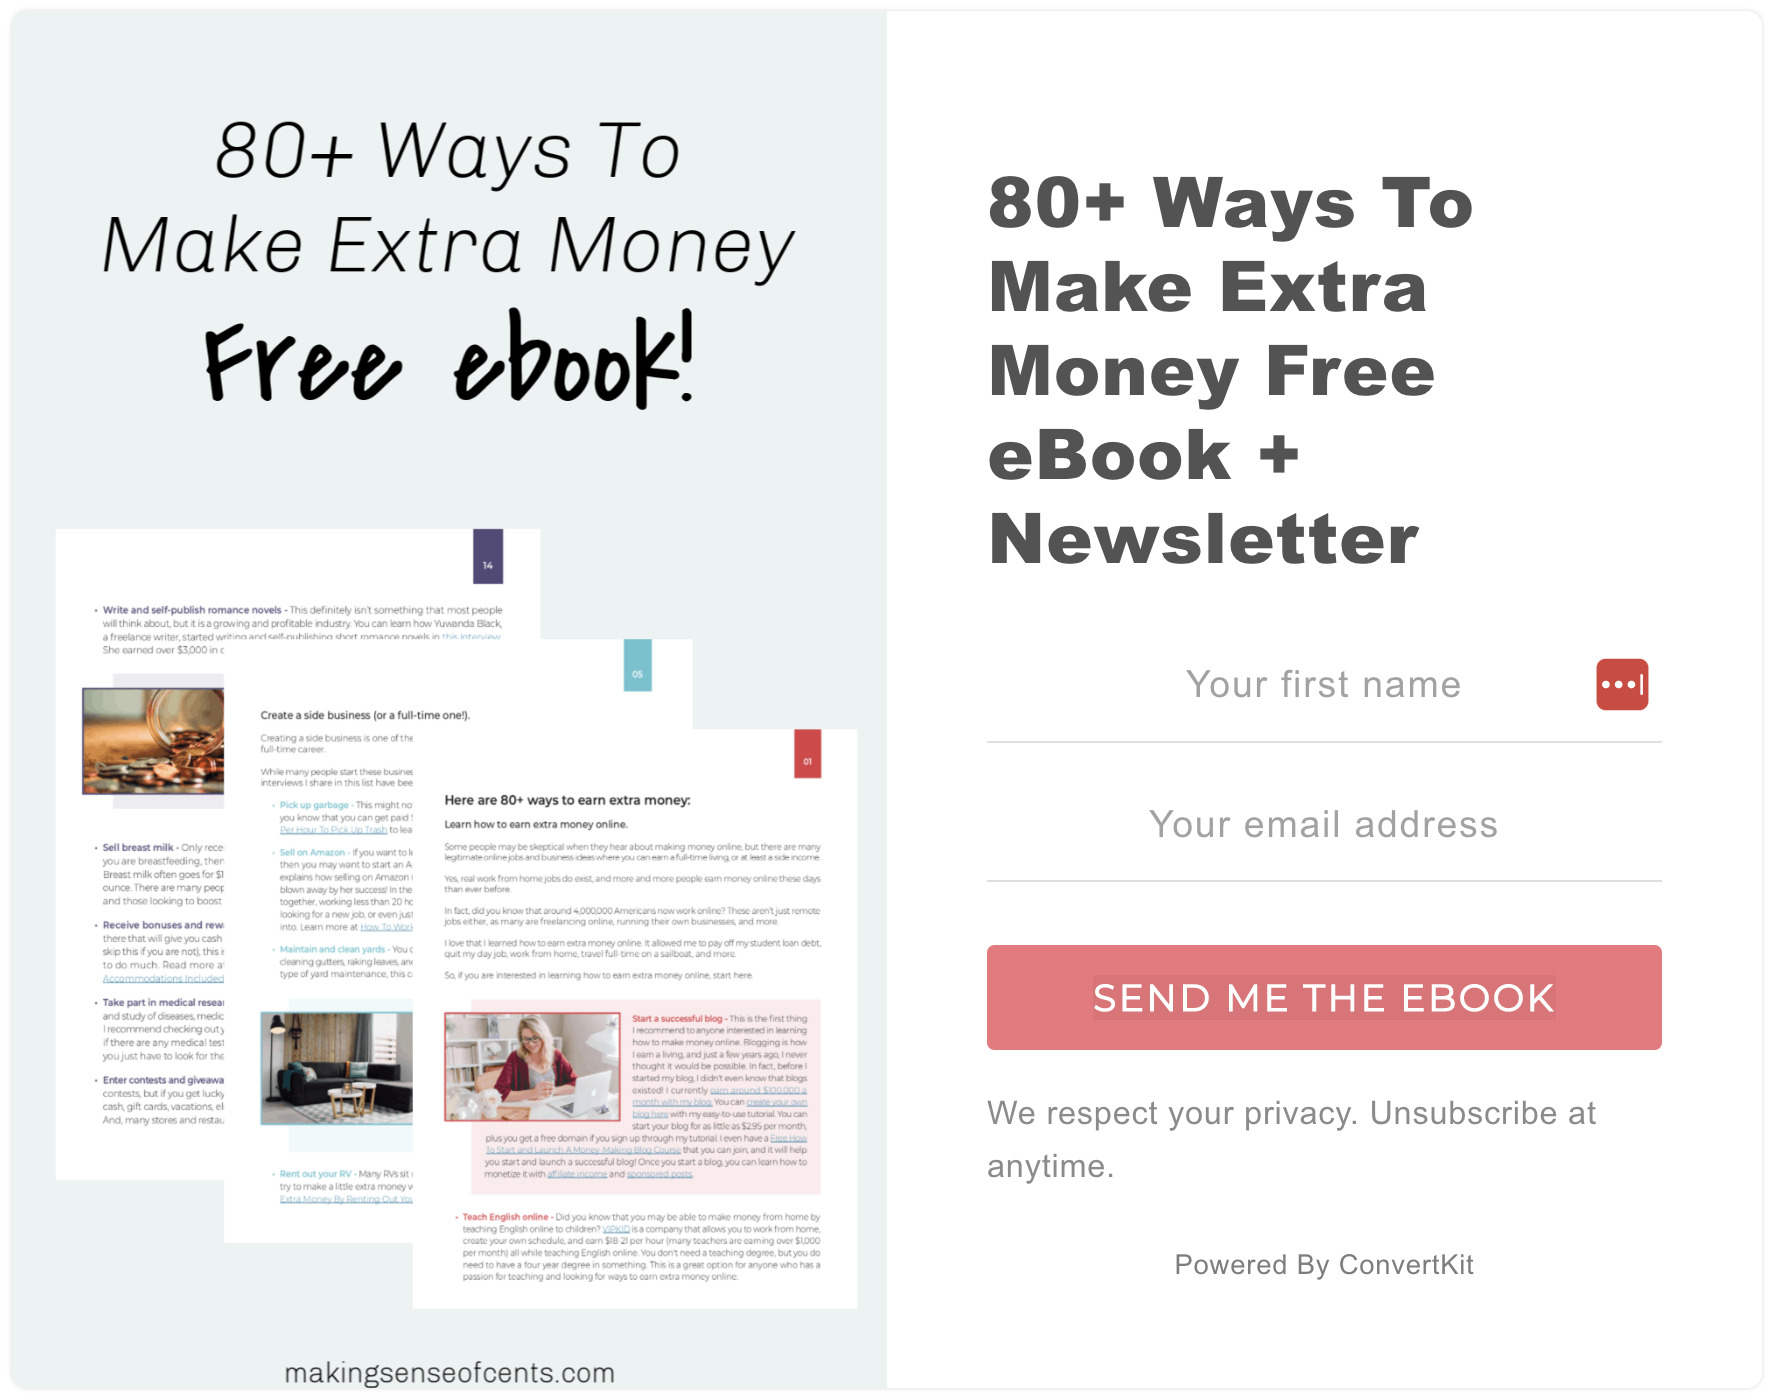 Making Sense of Cents' free ebook email opt-in